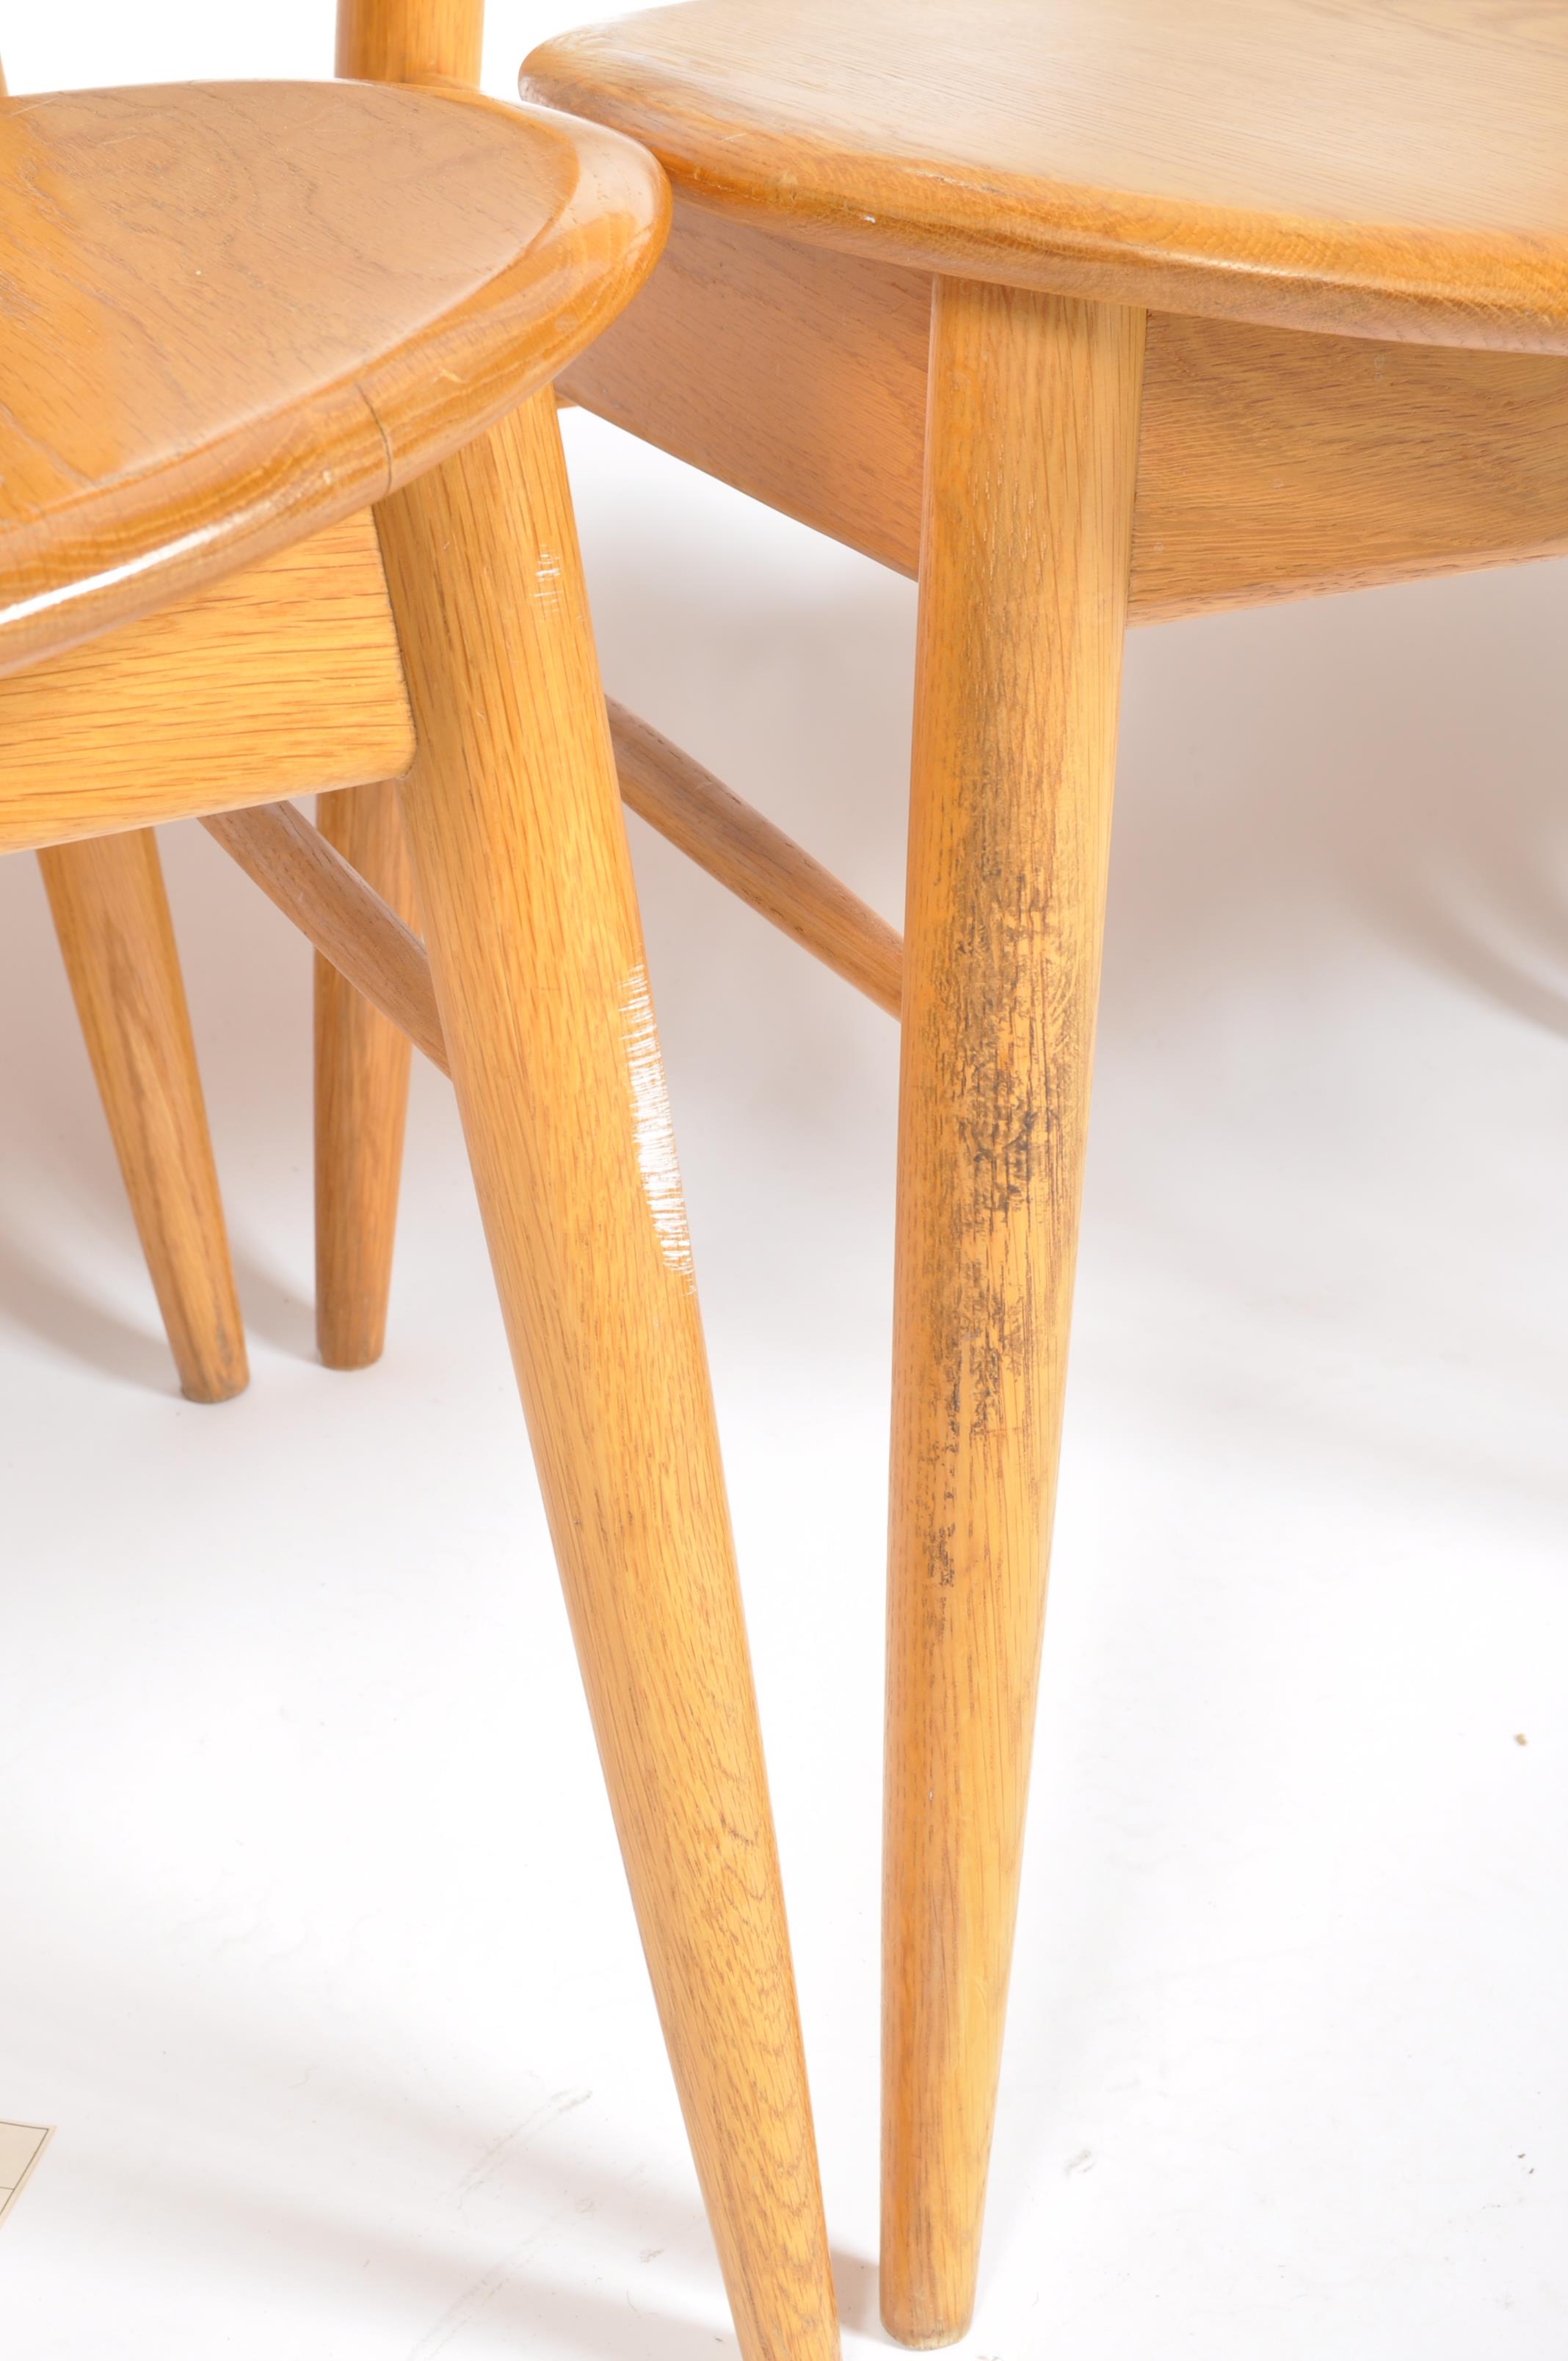 SET OF FOUR RETRO ELM DINING CHAIRS / SIDE CHAIRS - Image 5 of 8